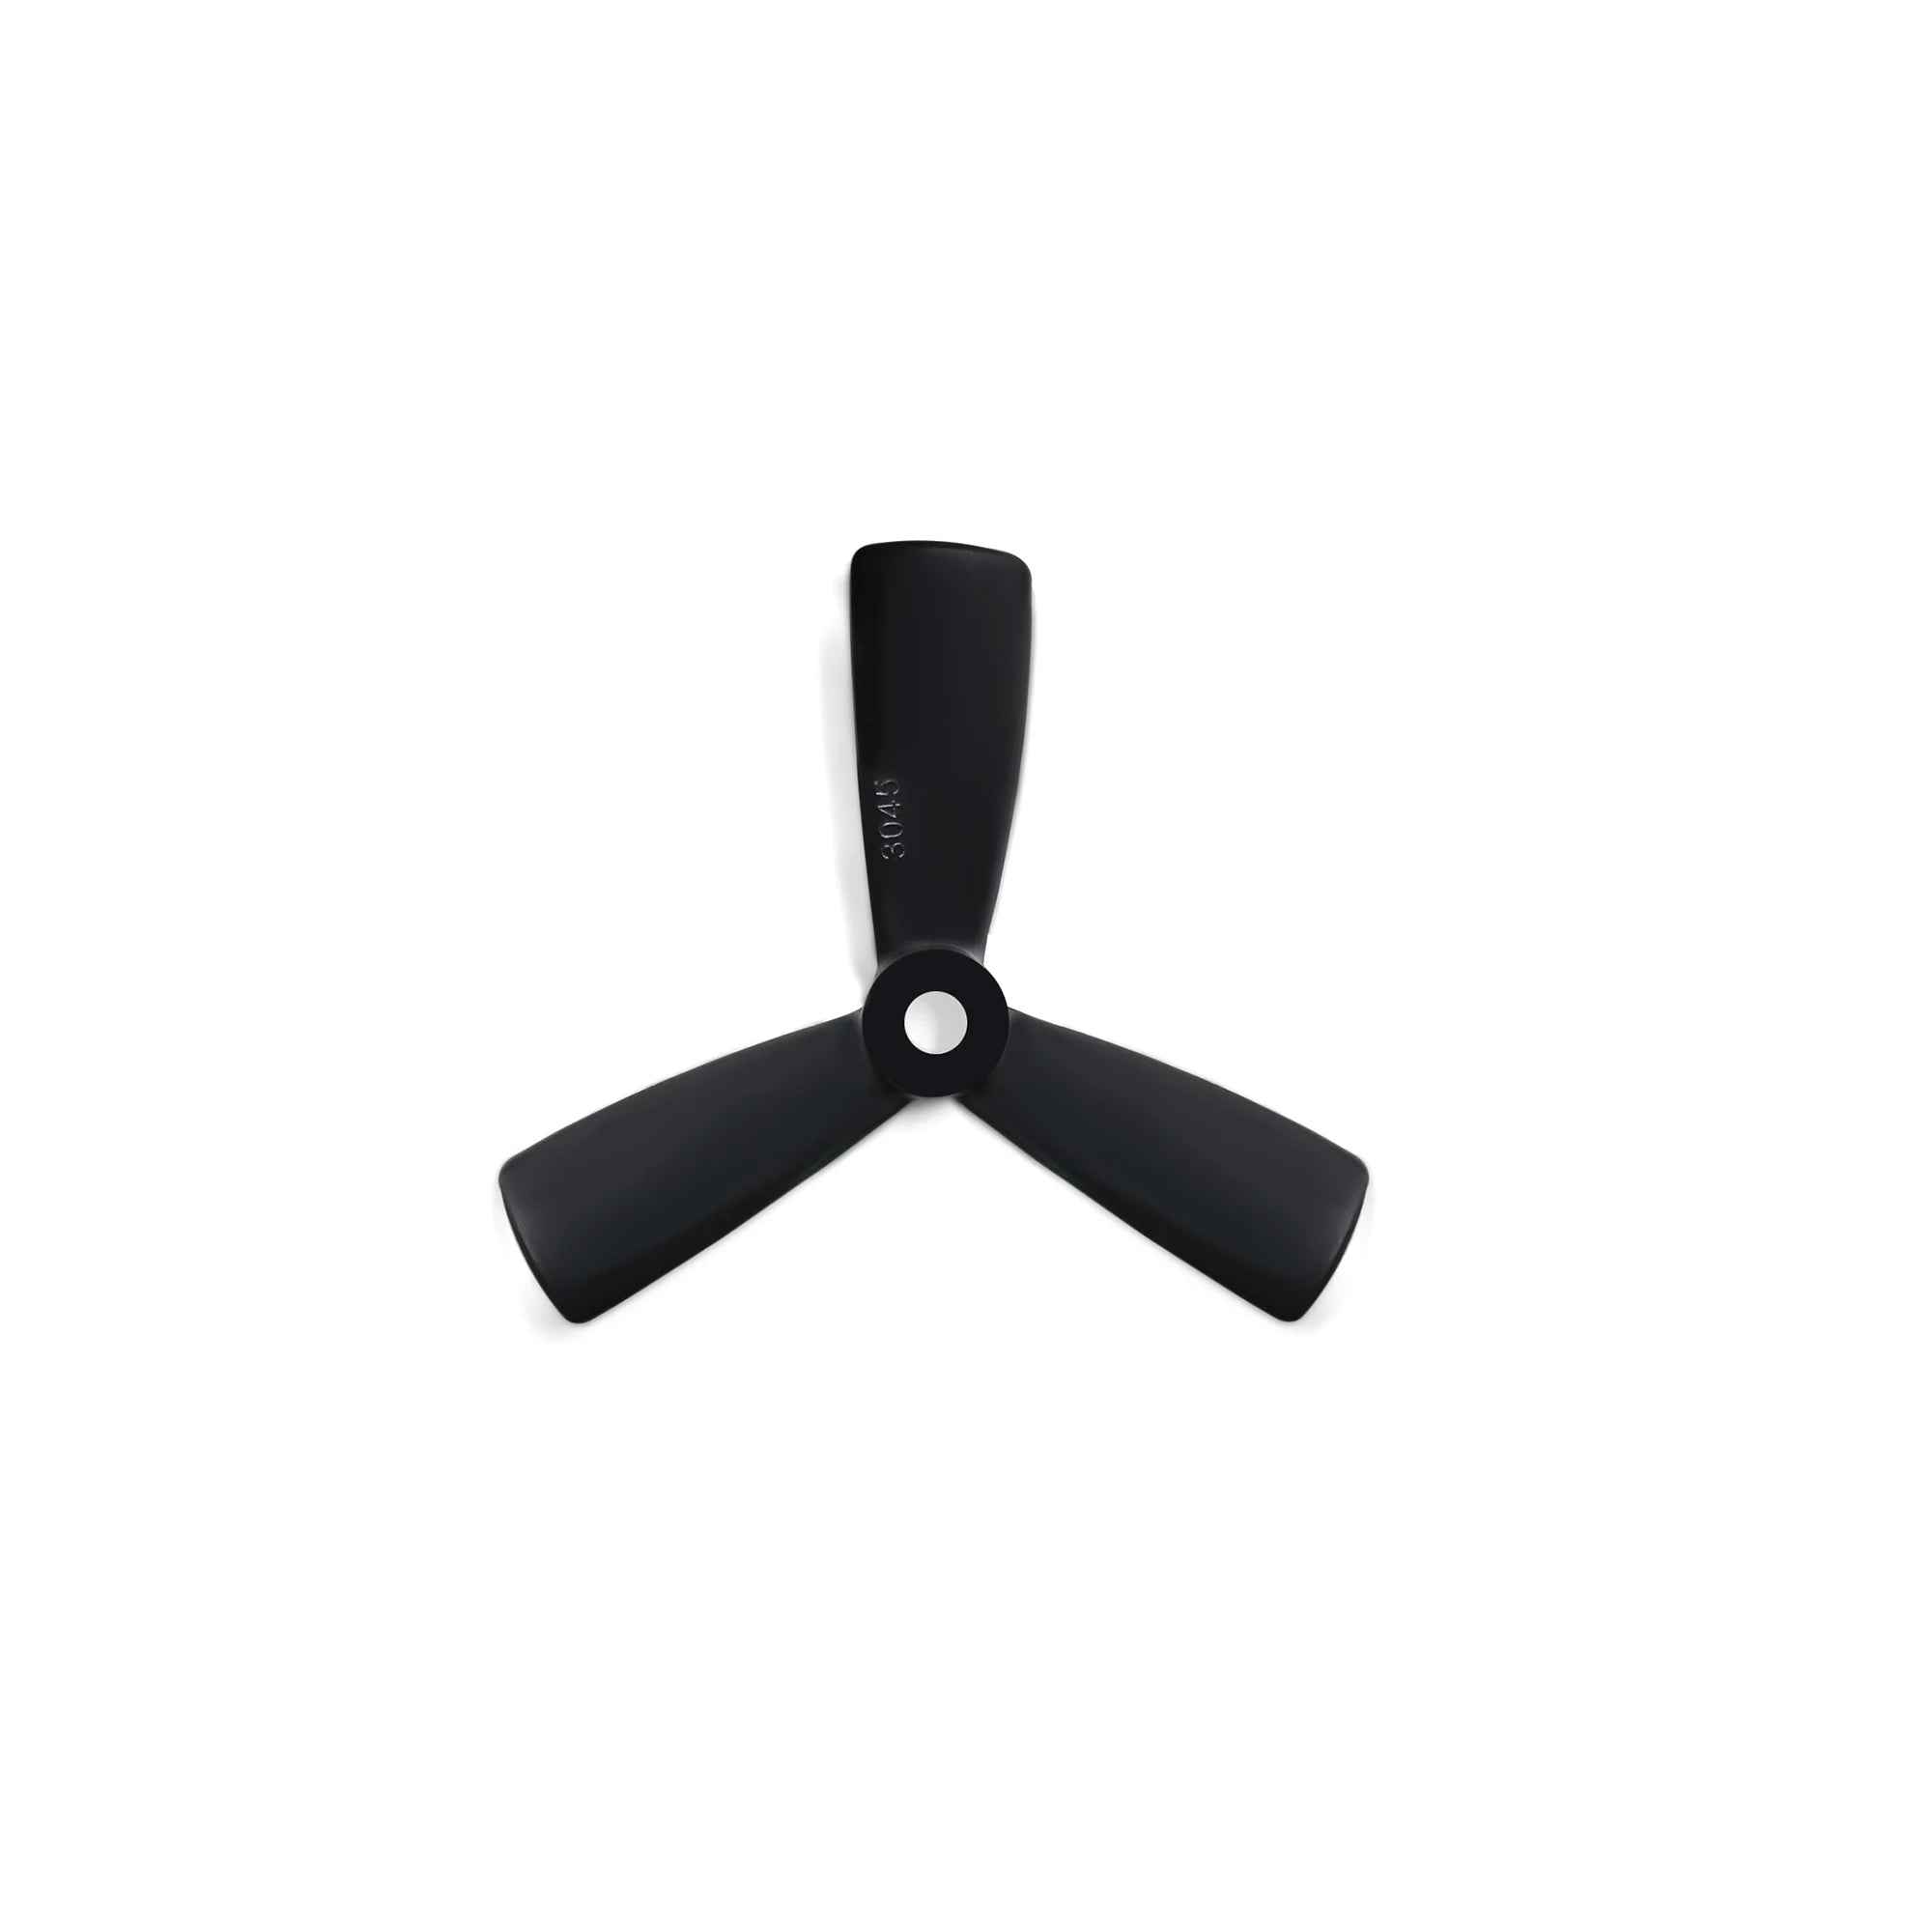 GEPRC G3045 Propeller, G3045 propeller is very strong and durable